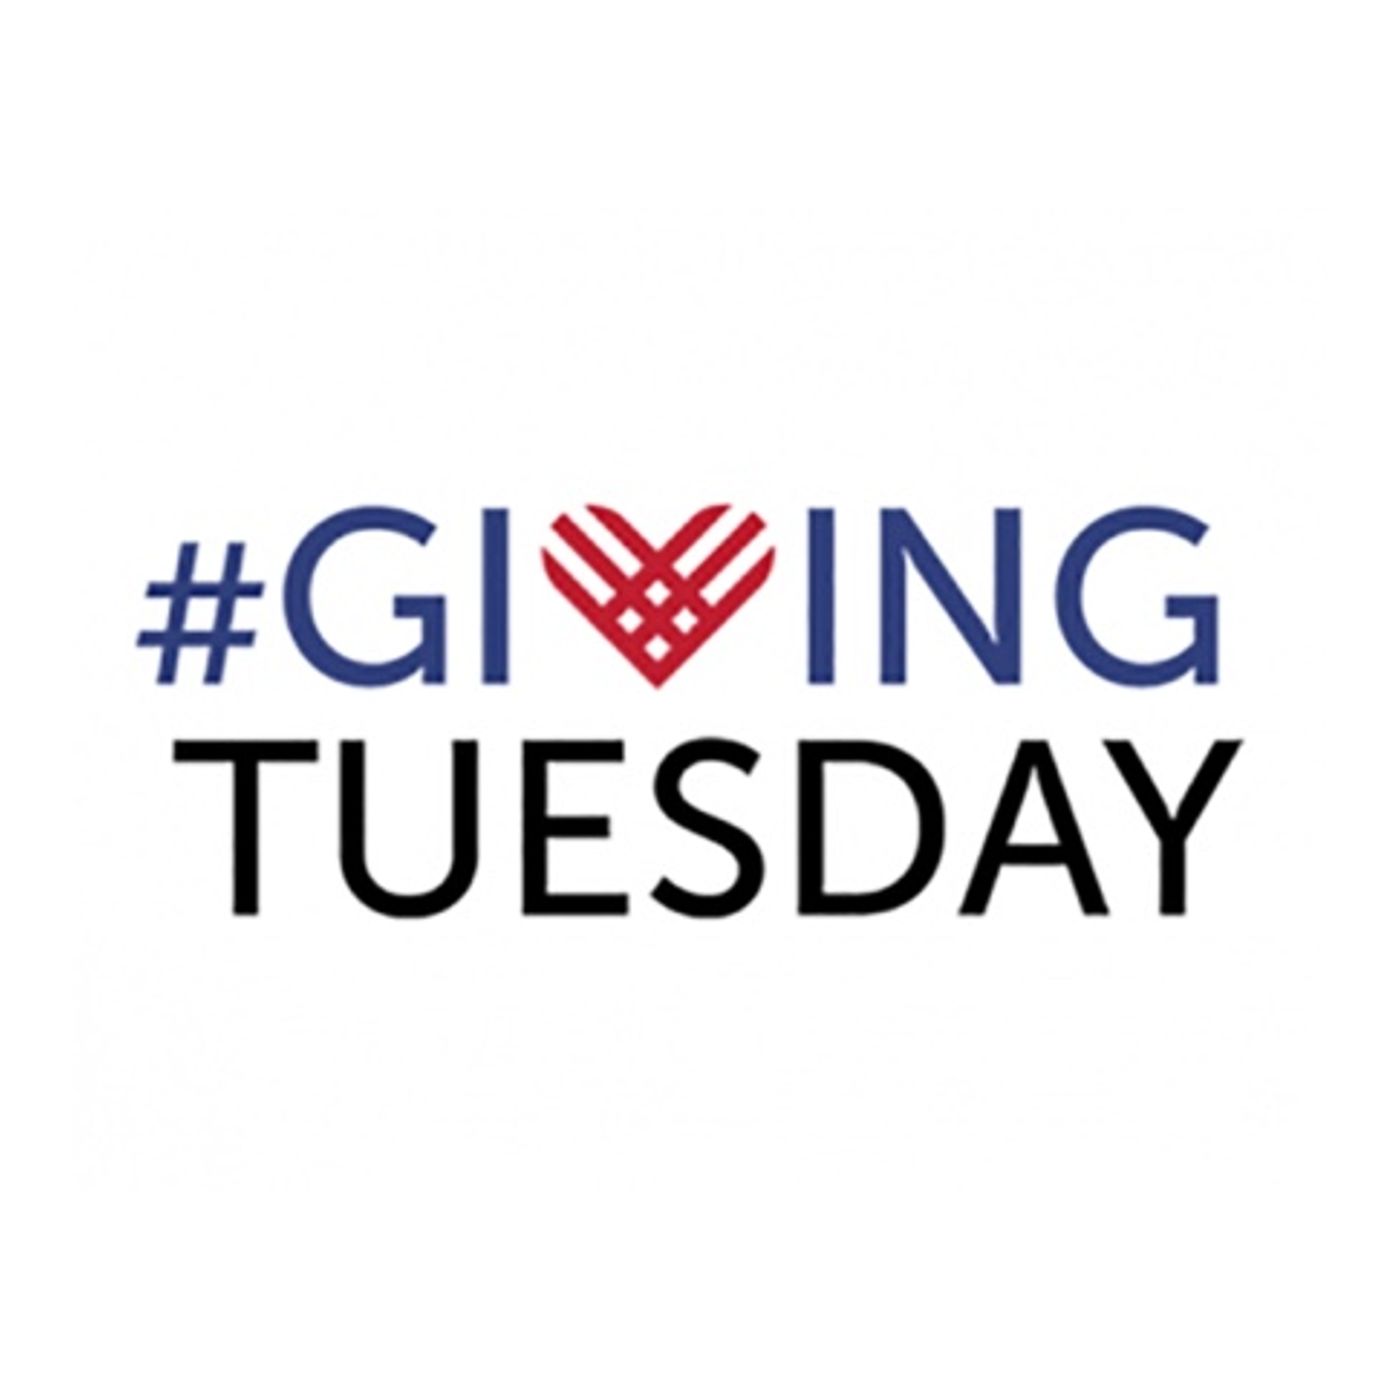 #GivingTuesday and Christian Ministries Asking For Money